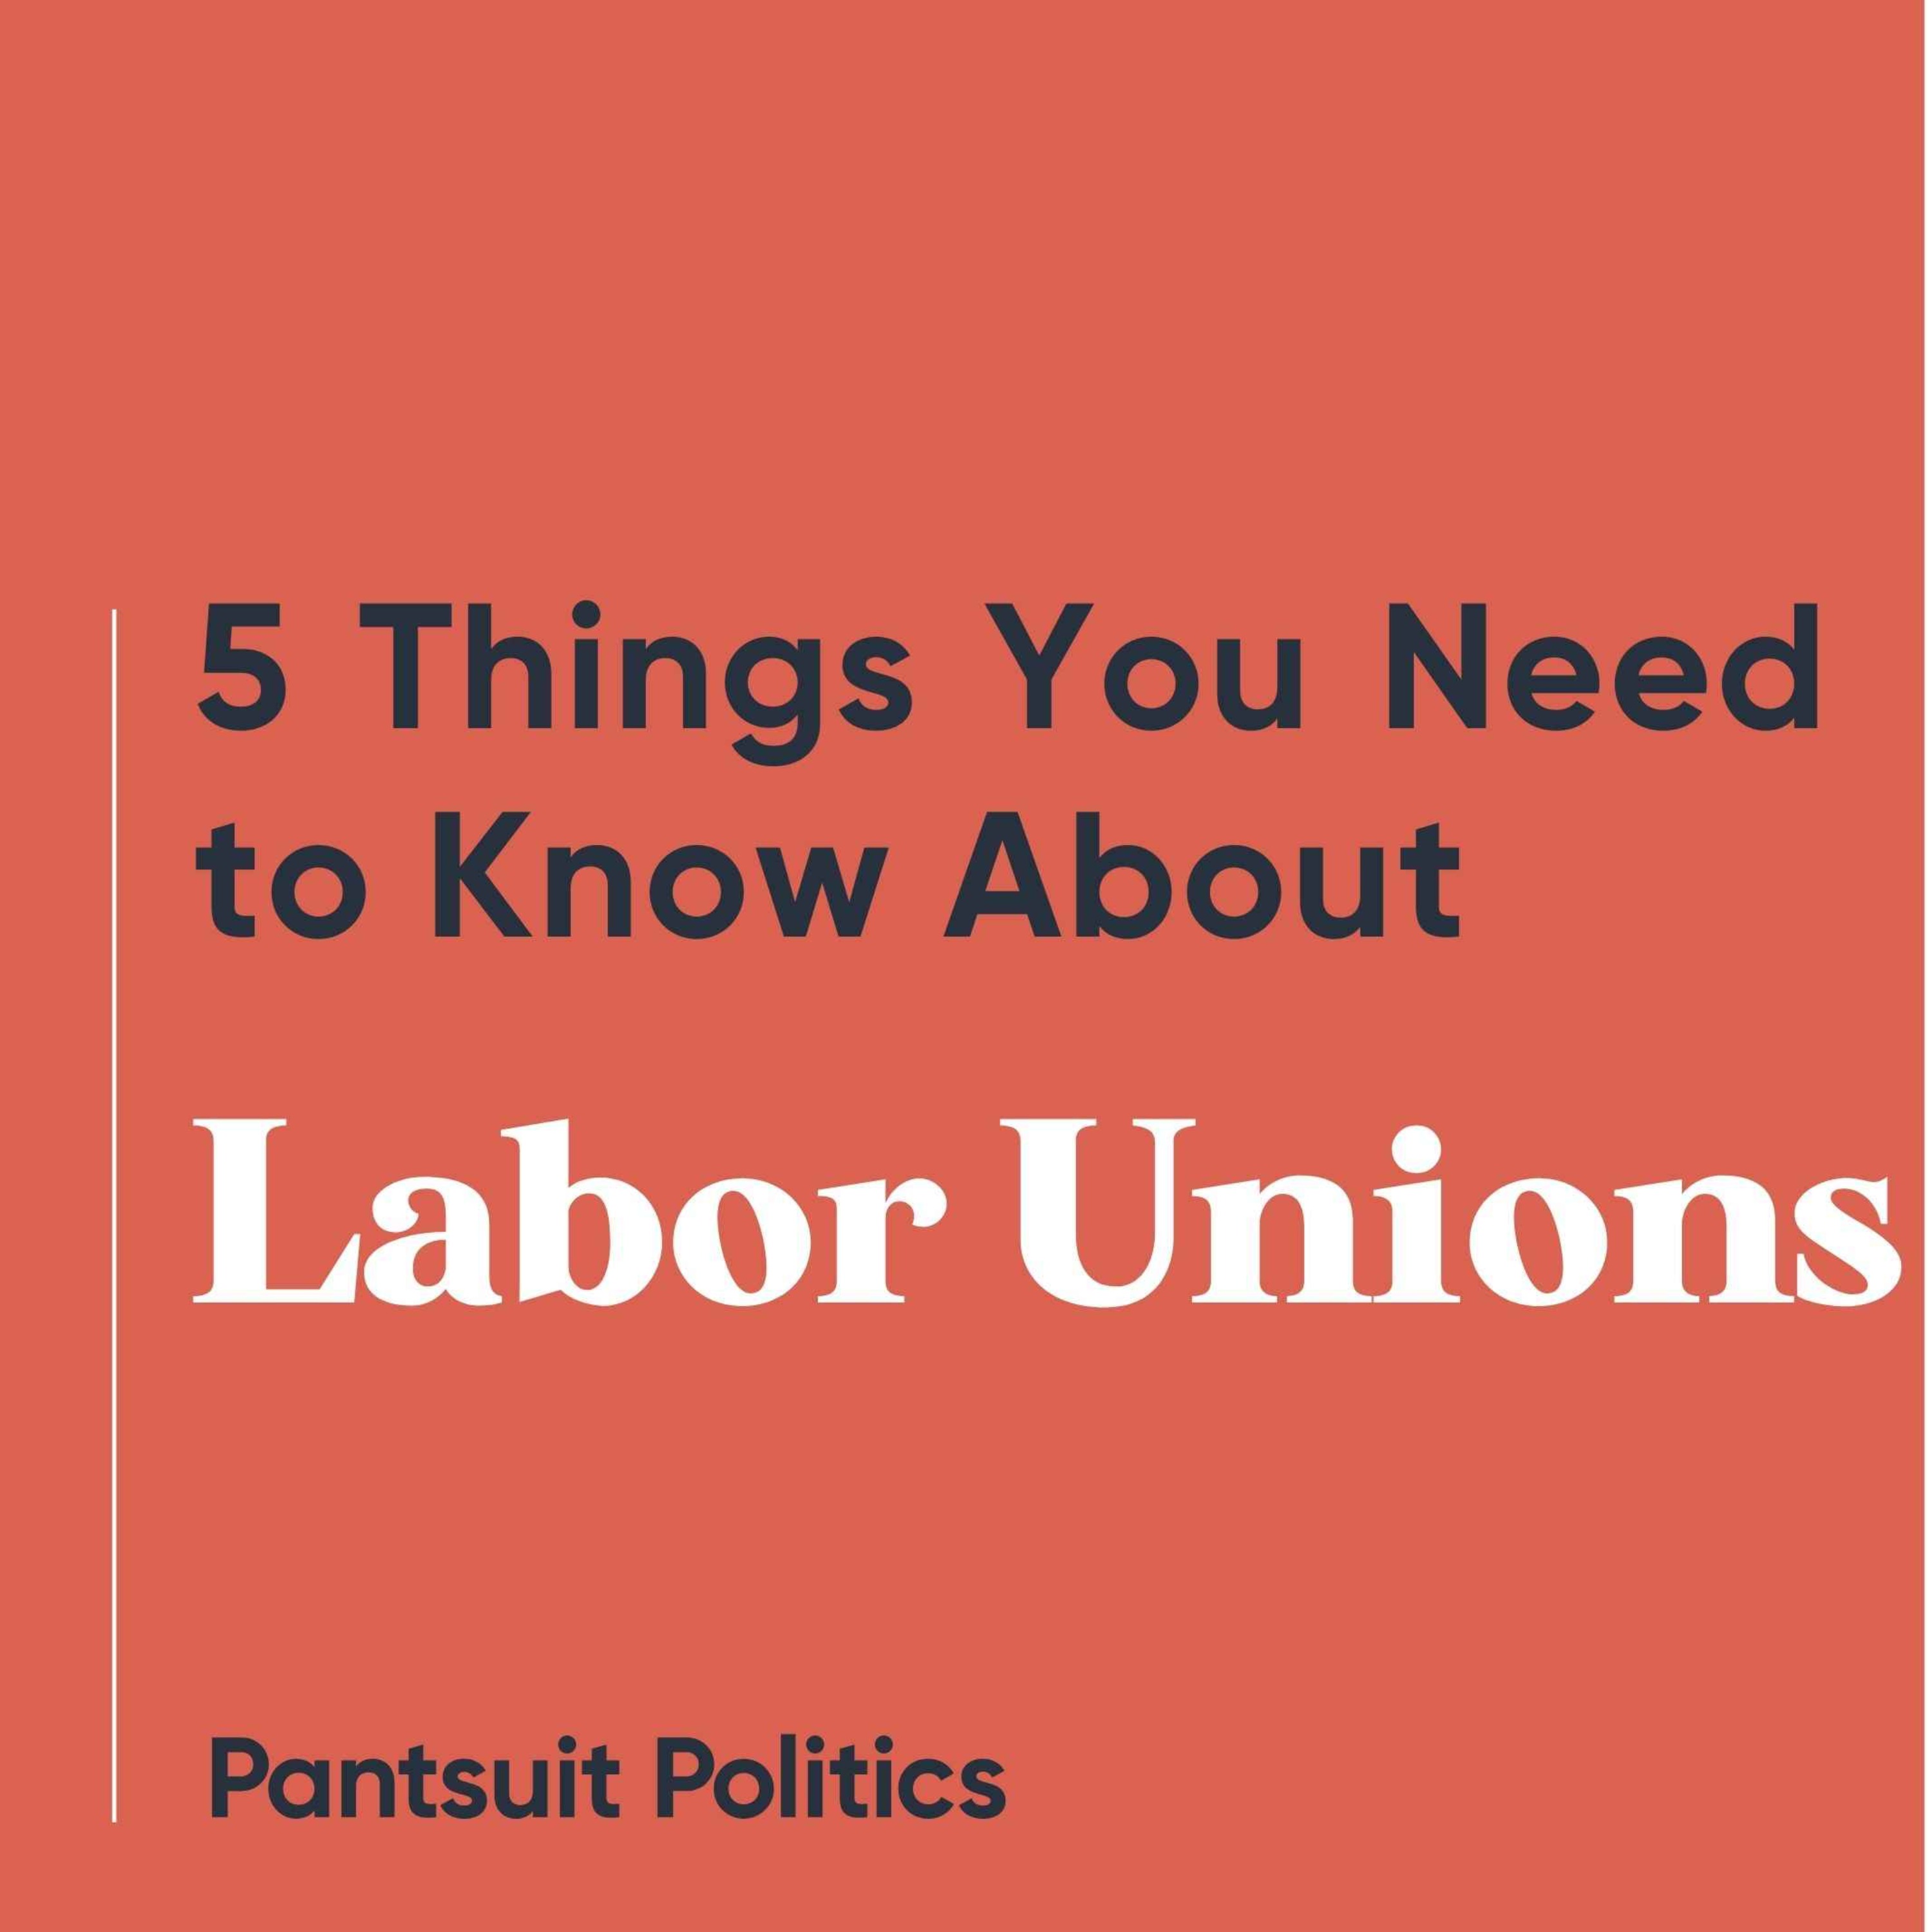 5 Things You Need to Know About Labor Unions